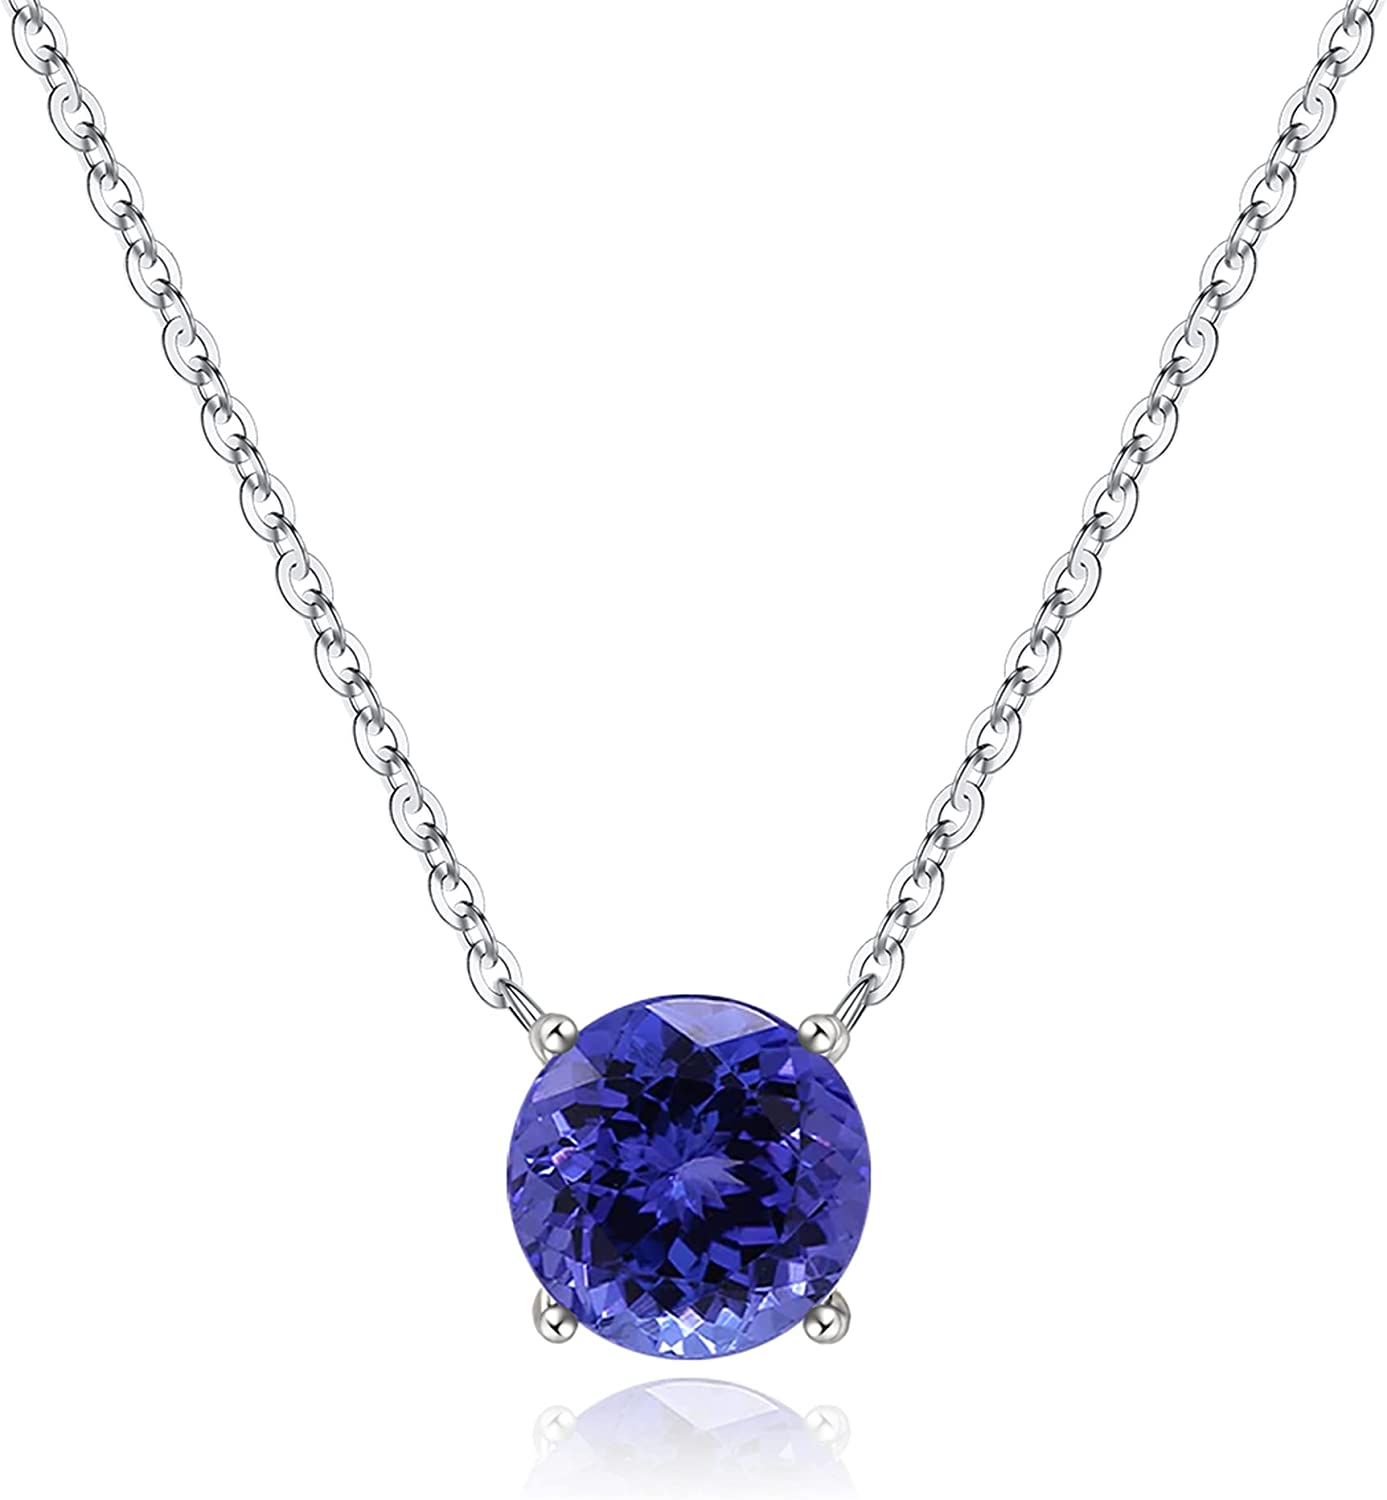 Sterling tanzanite necklace